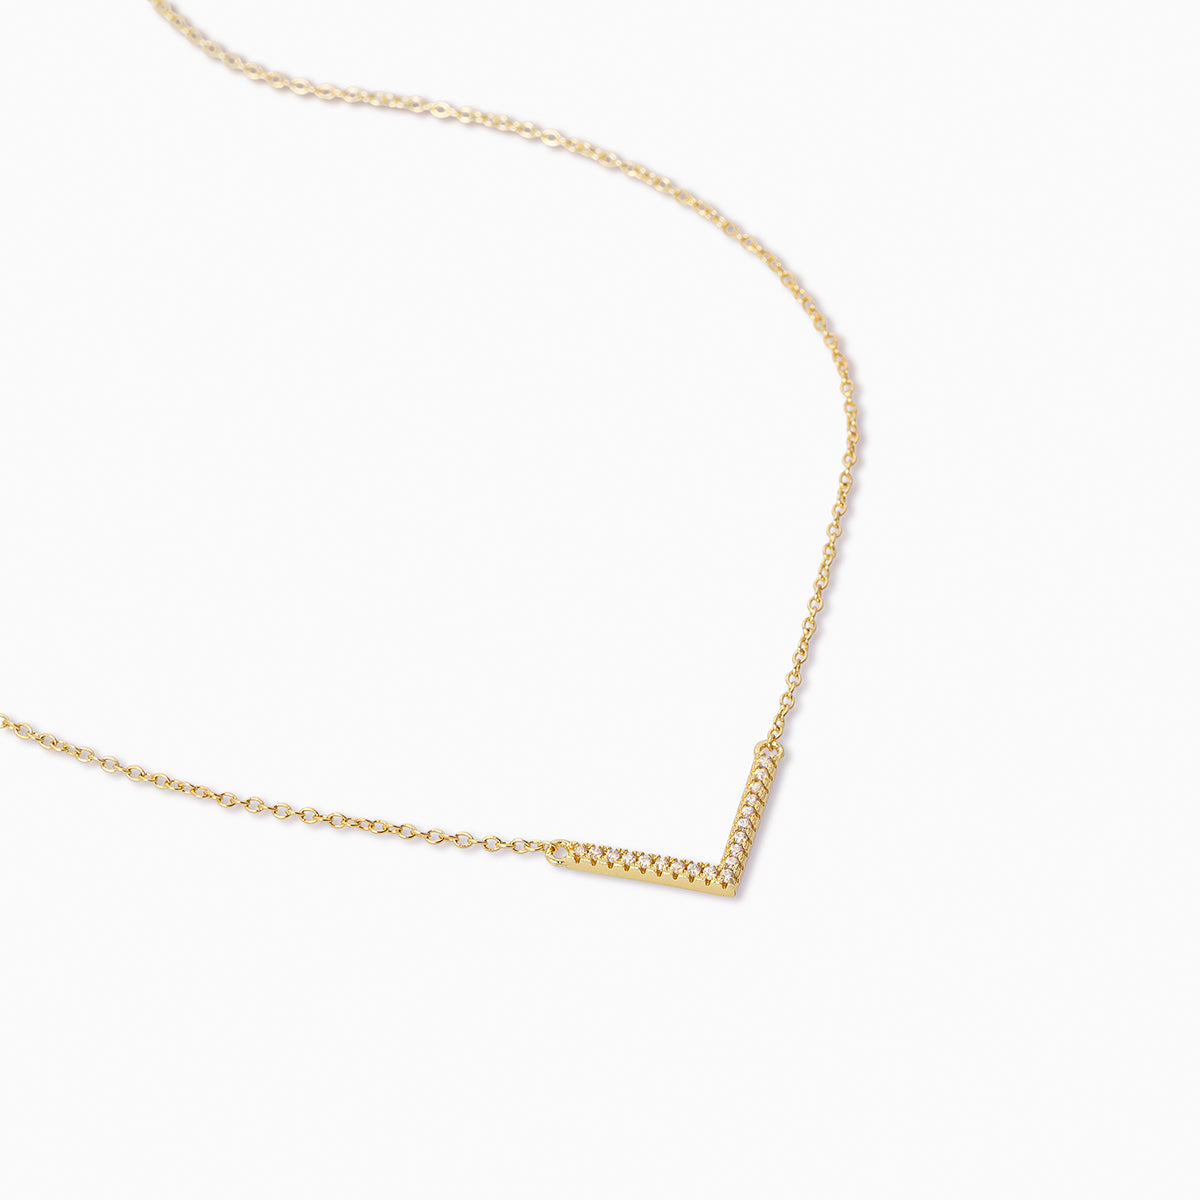 Studded Baby V Necklace | Gold | Product Detail Image | Uncommon James